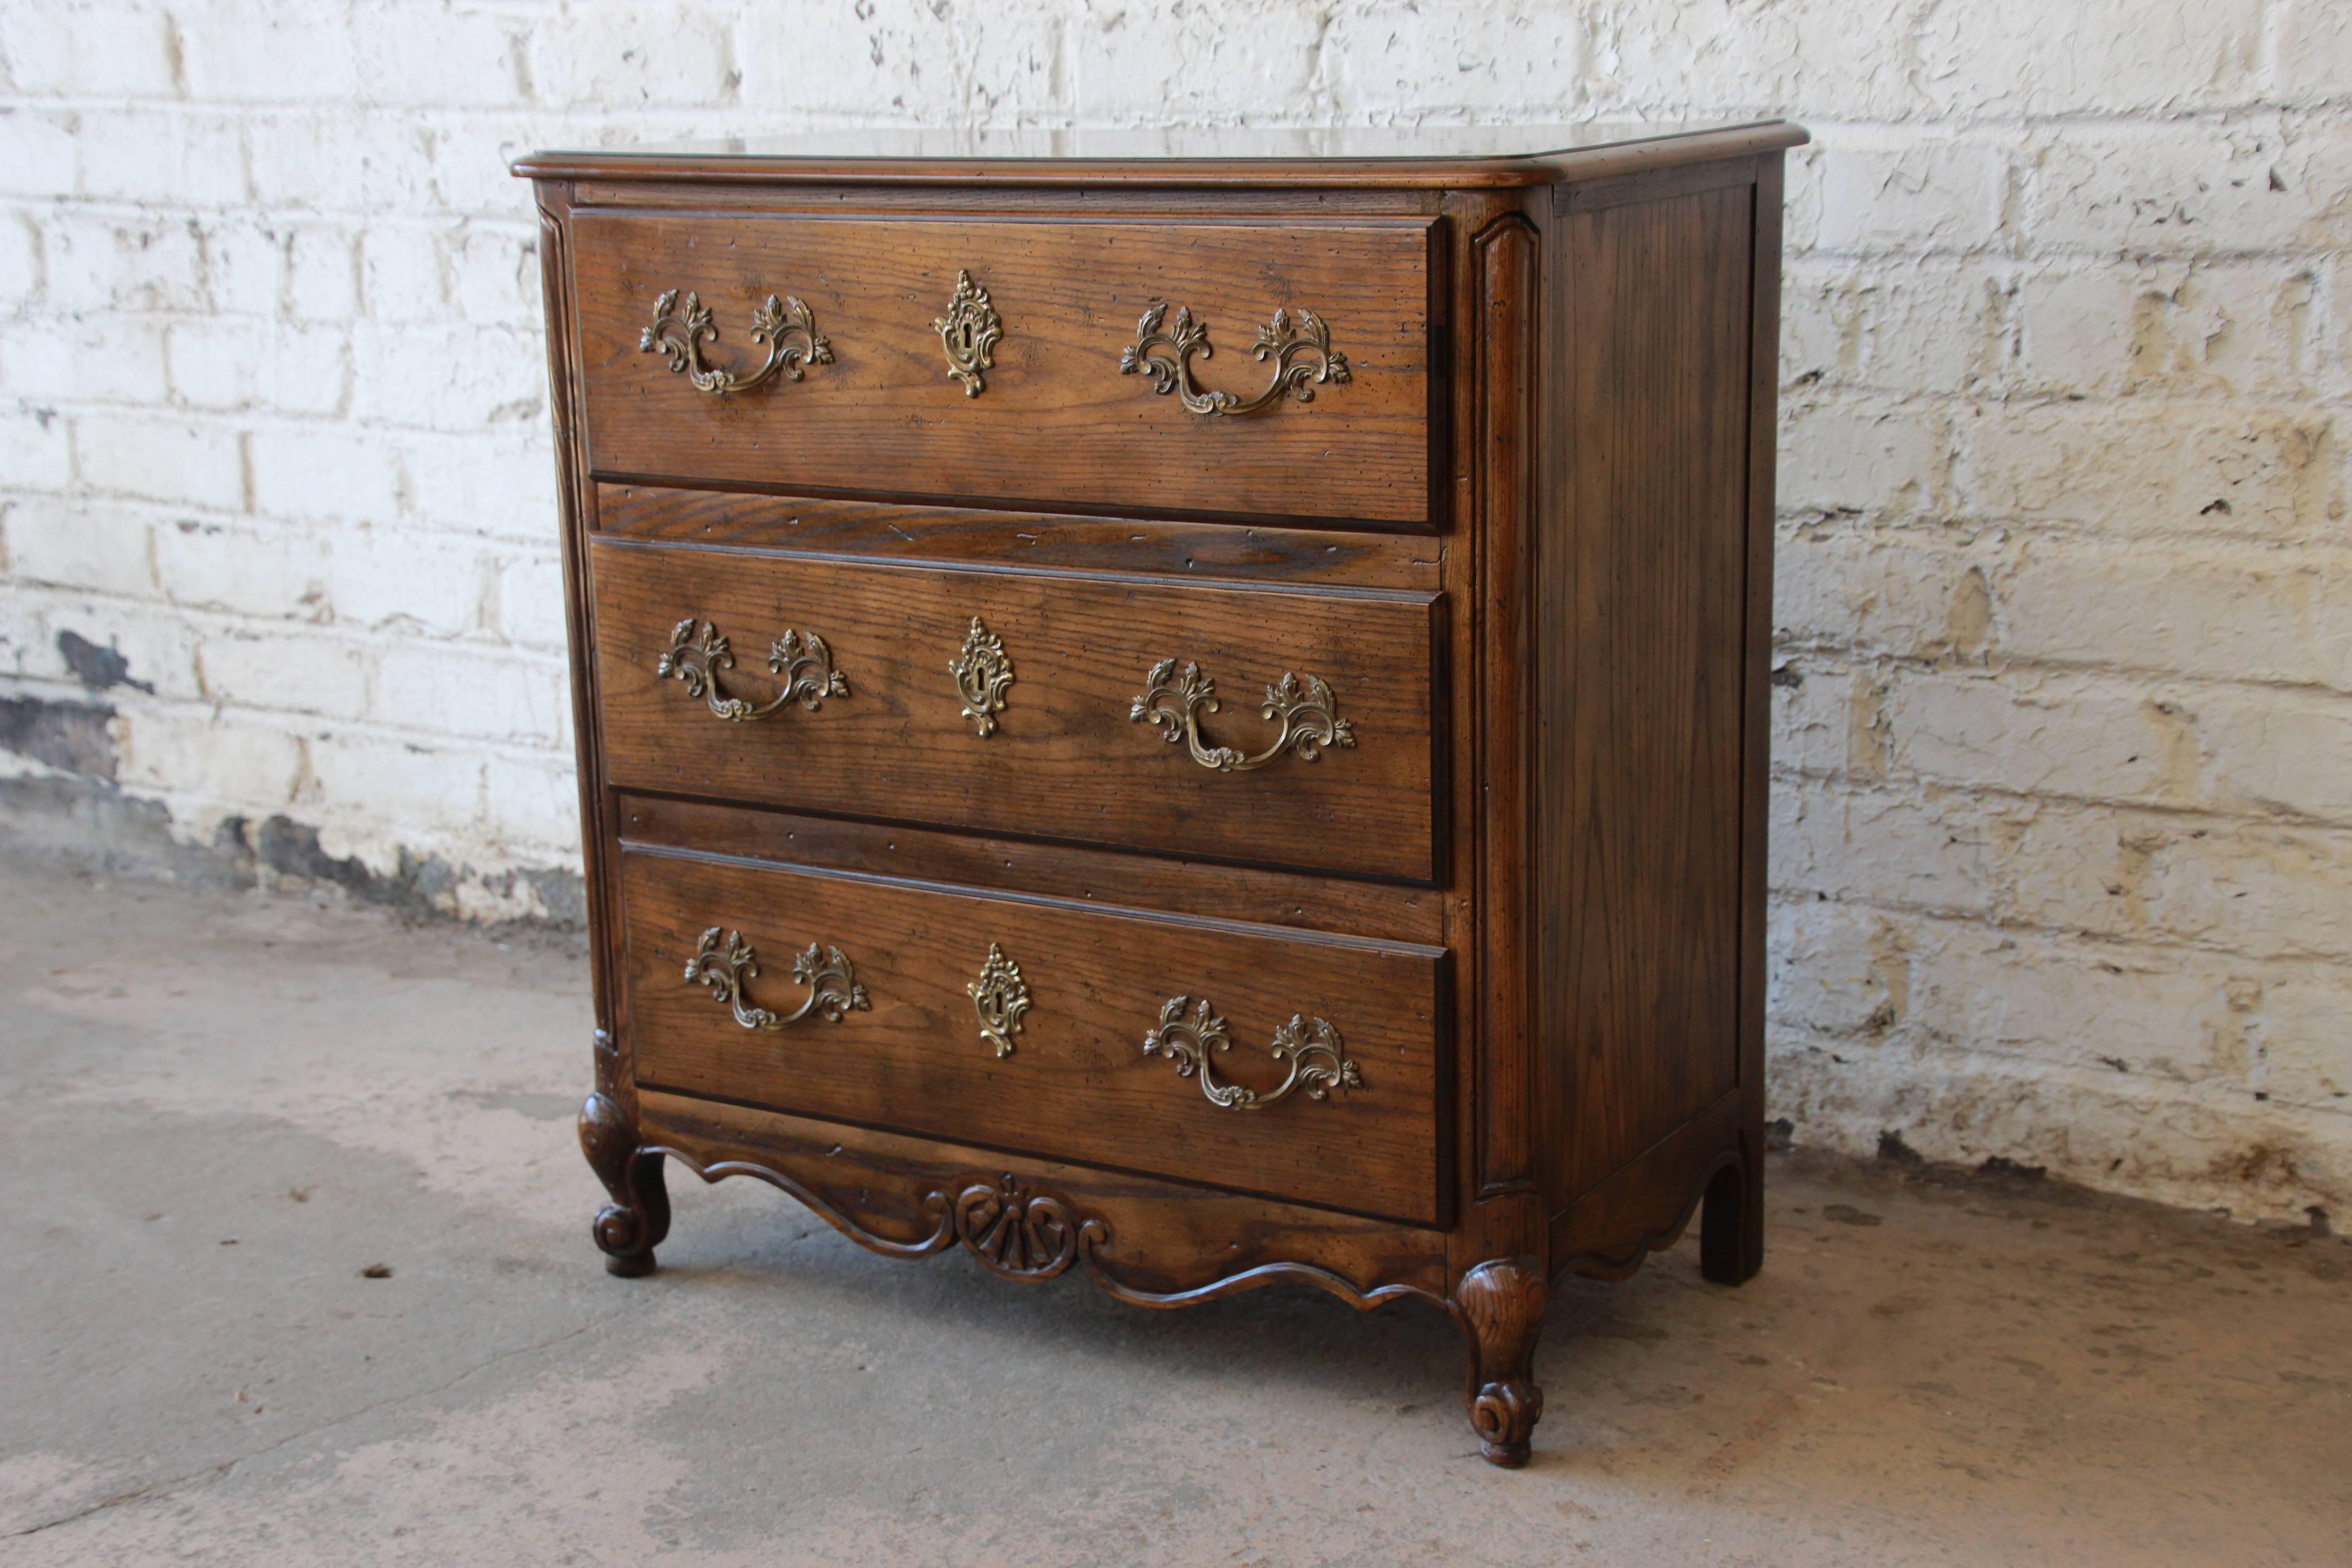 A beautiful vintage three-drawer chest in Louis XV style by Baker Furniture. The chest features gorgeous wood grain and an inlaid burl wood top. It is well constructed from solid oak and offers good storage with three dovetailed drawers. The